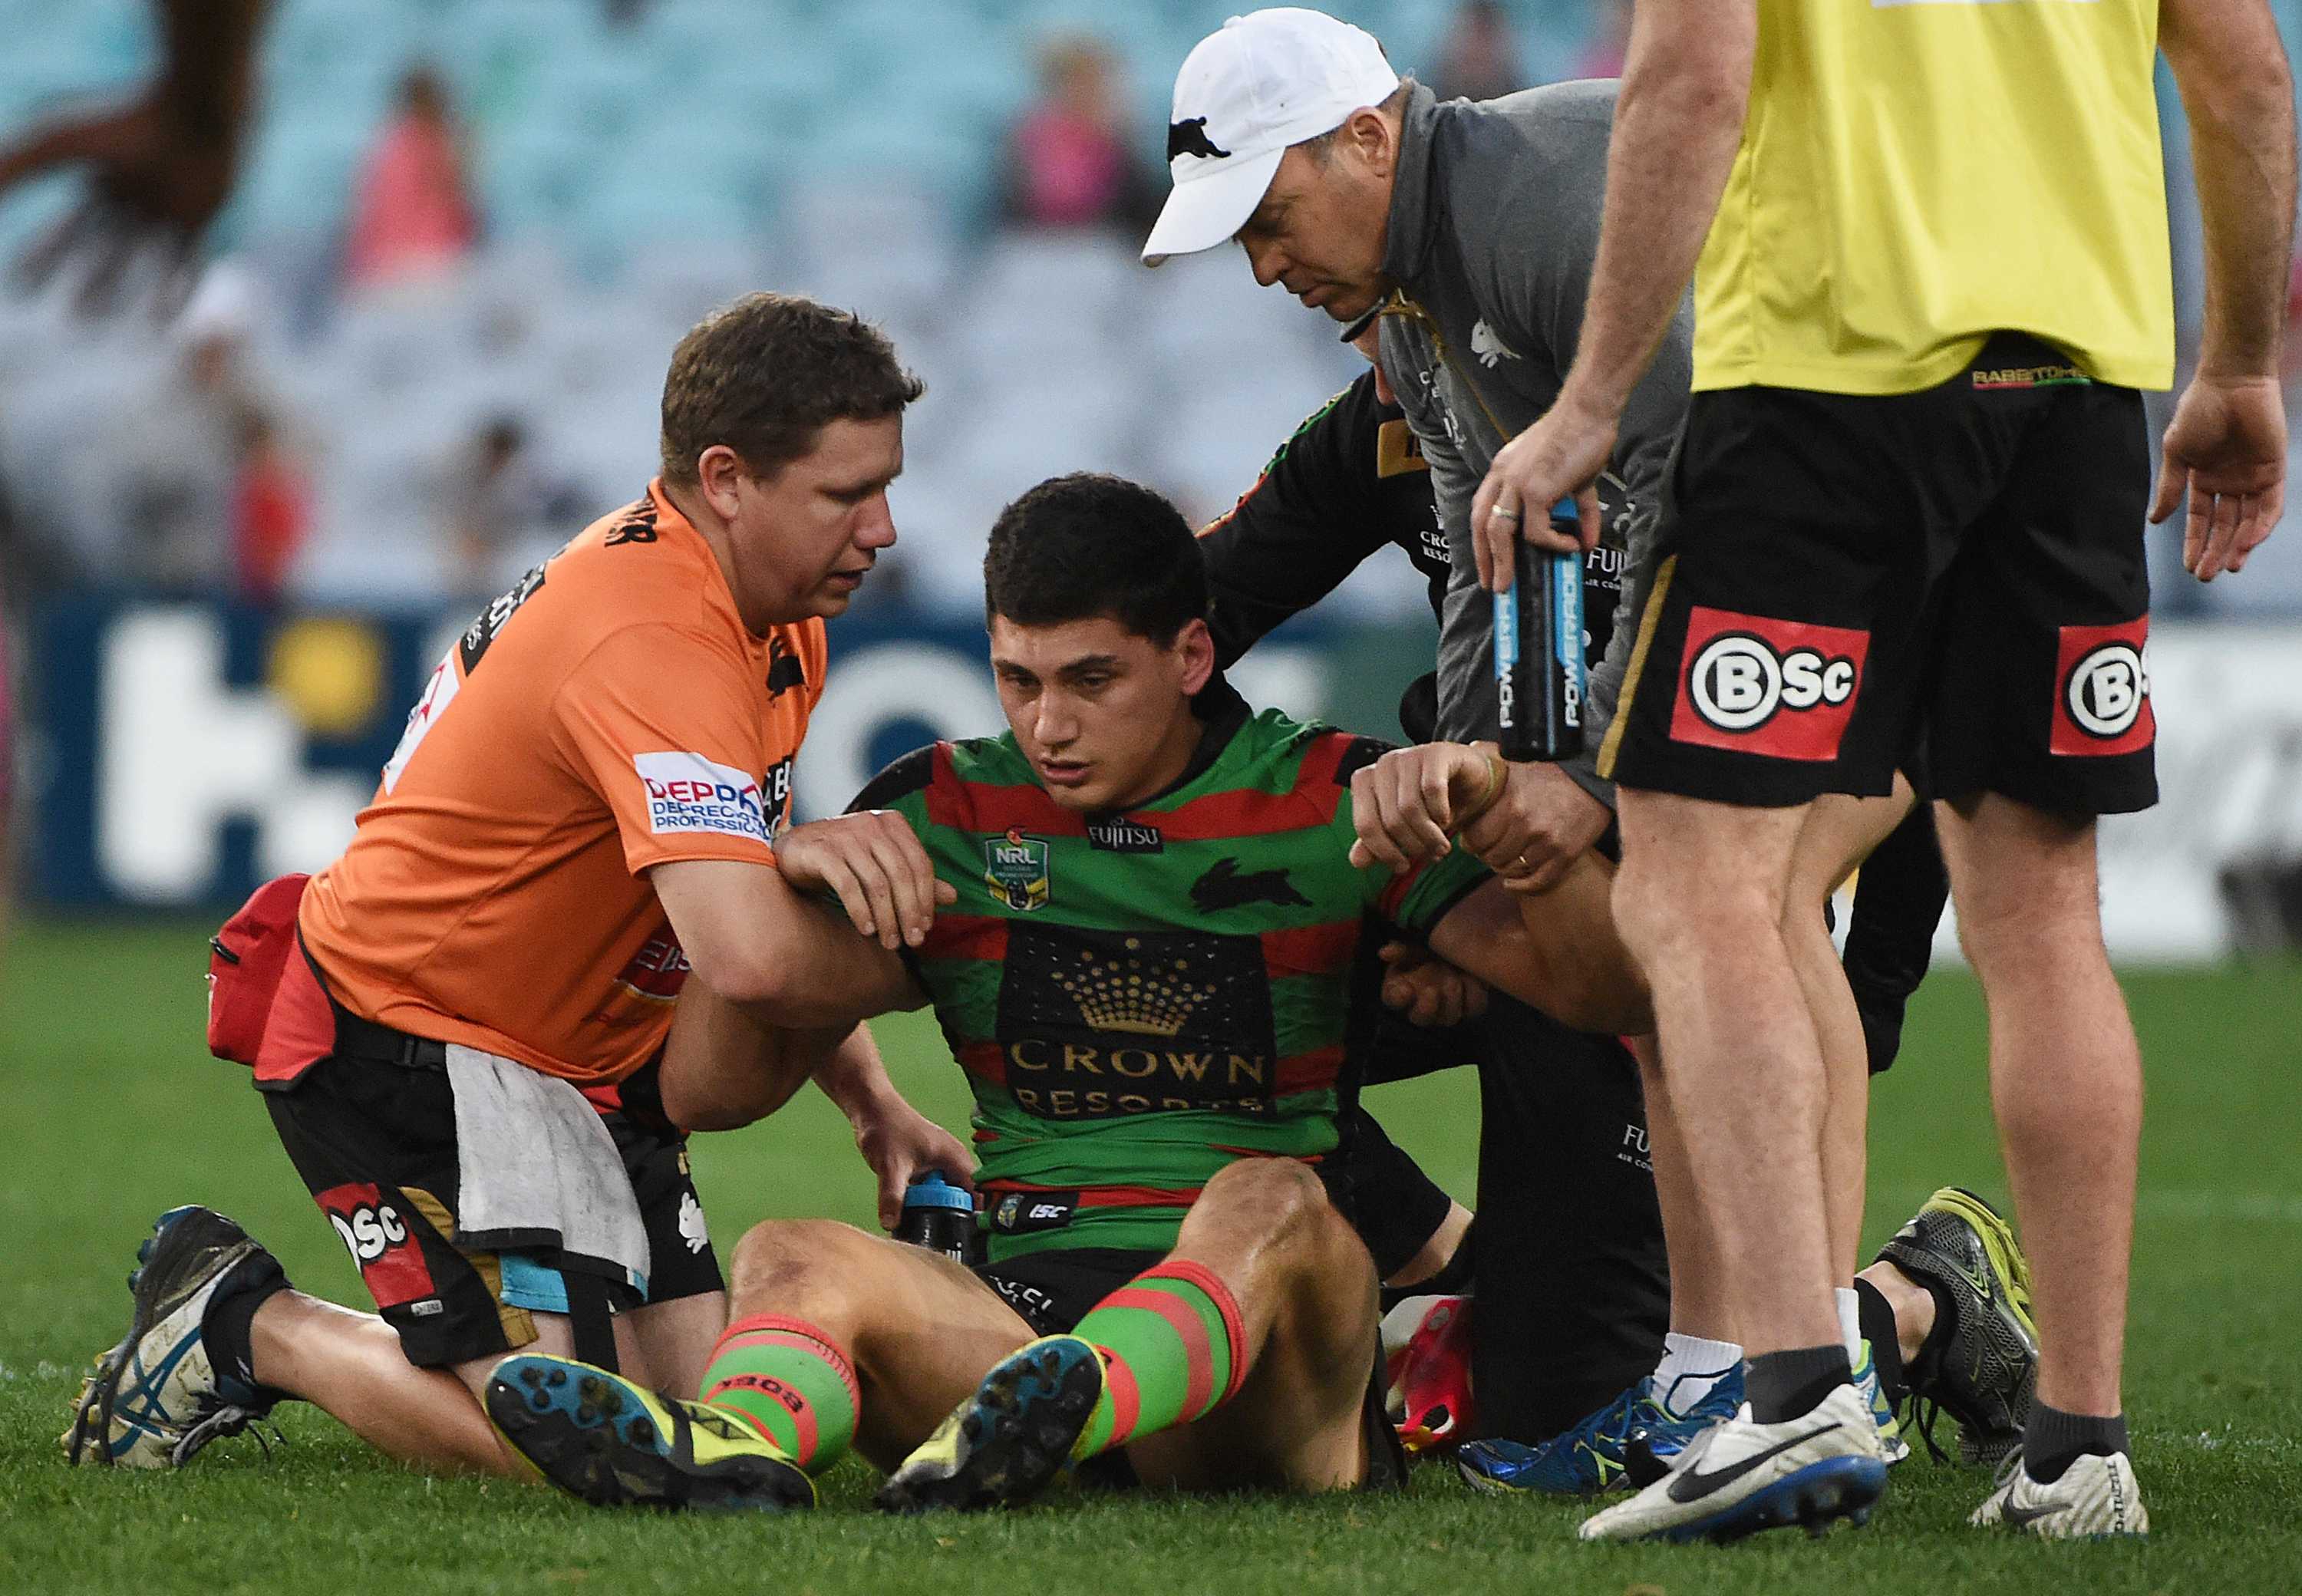 Rugby League players found to have deadly brain disease linked to concussions